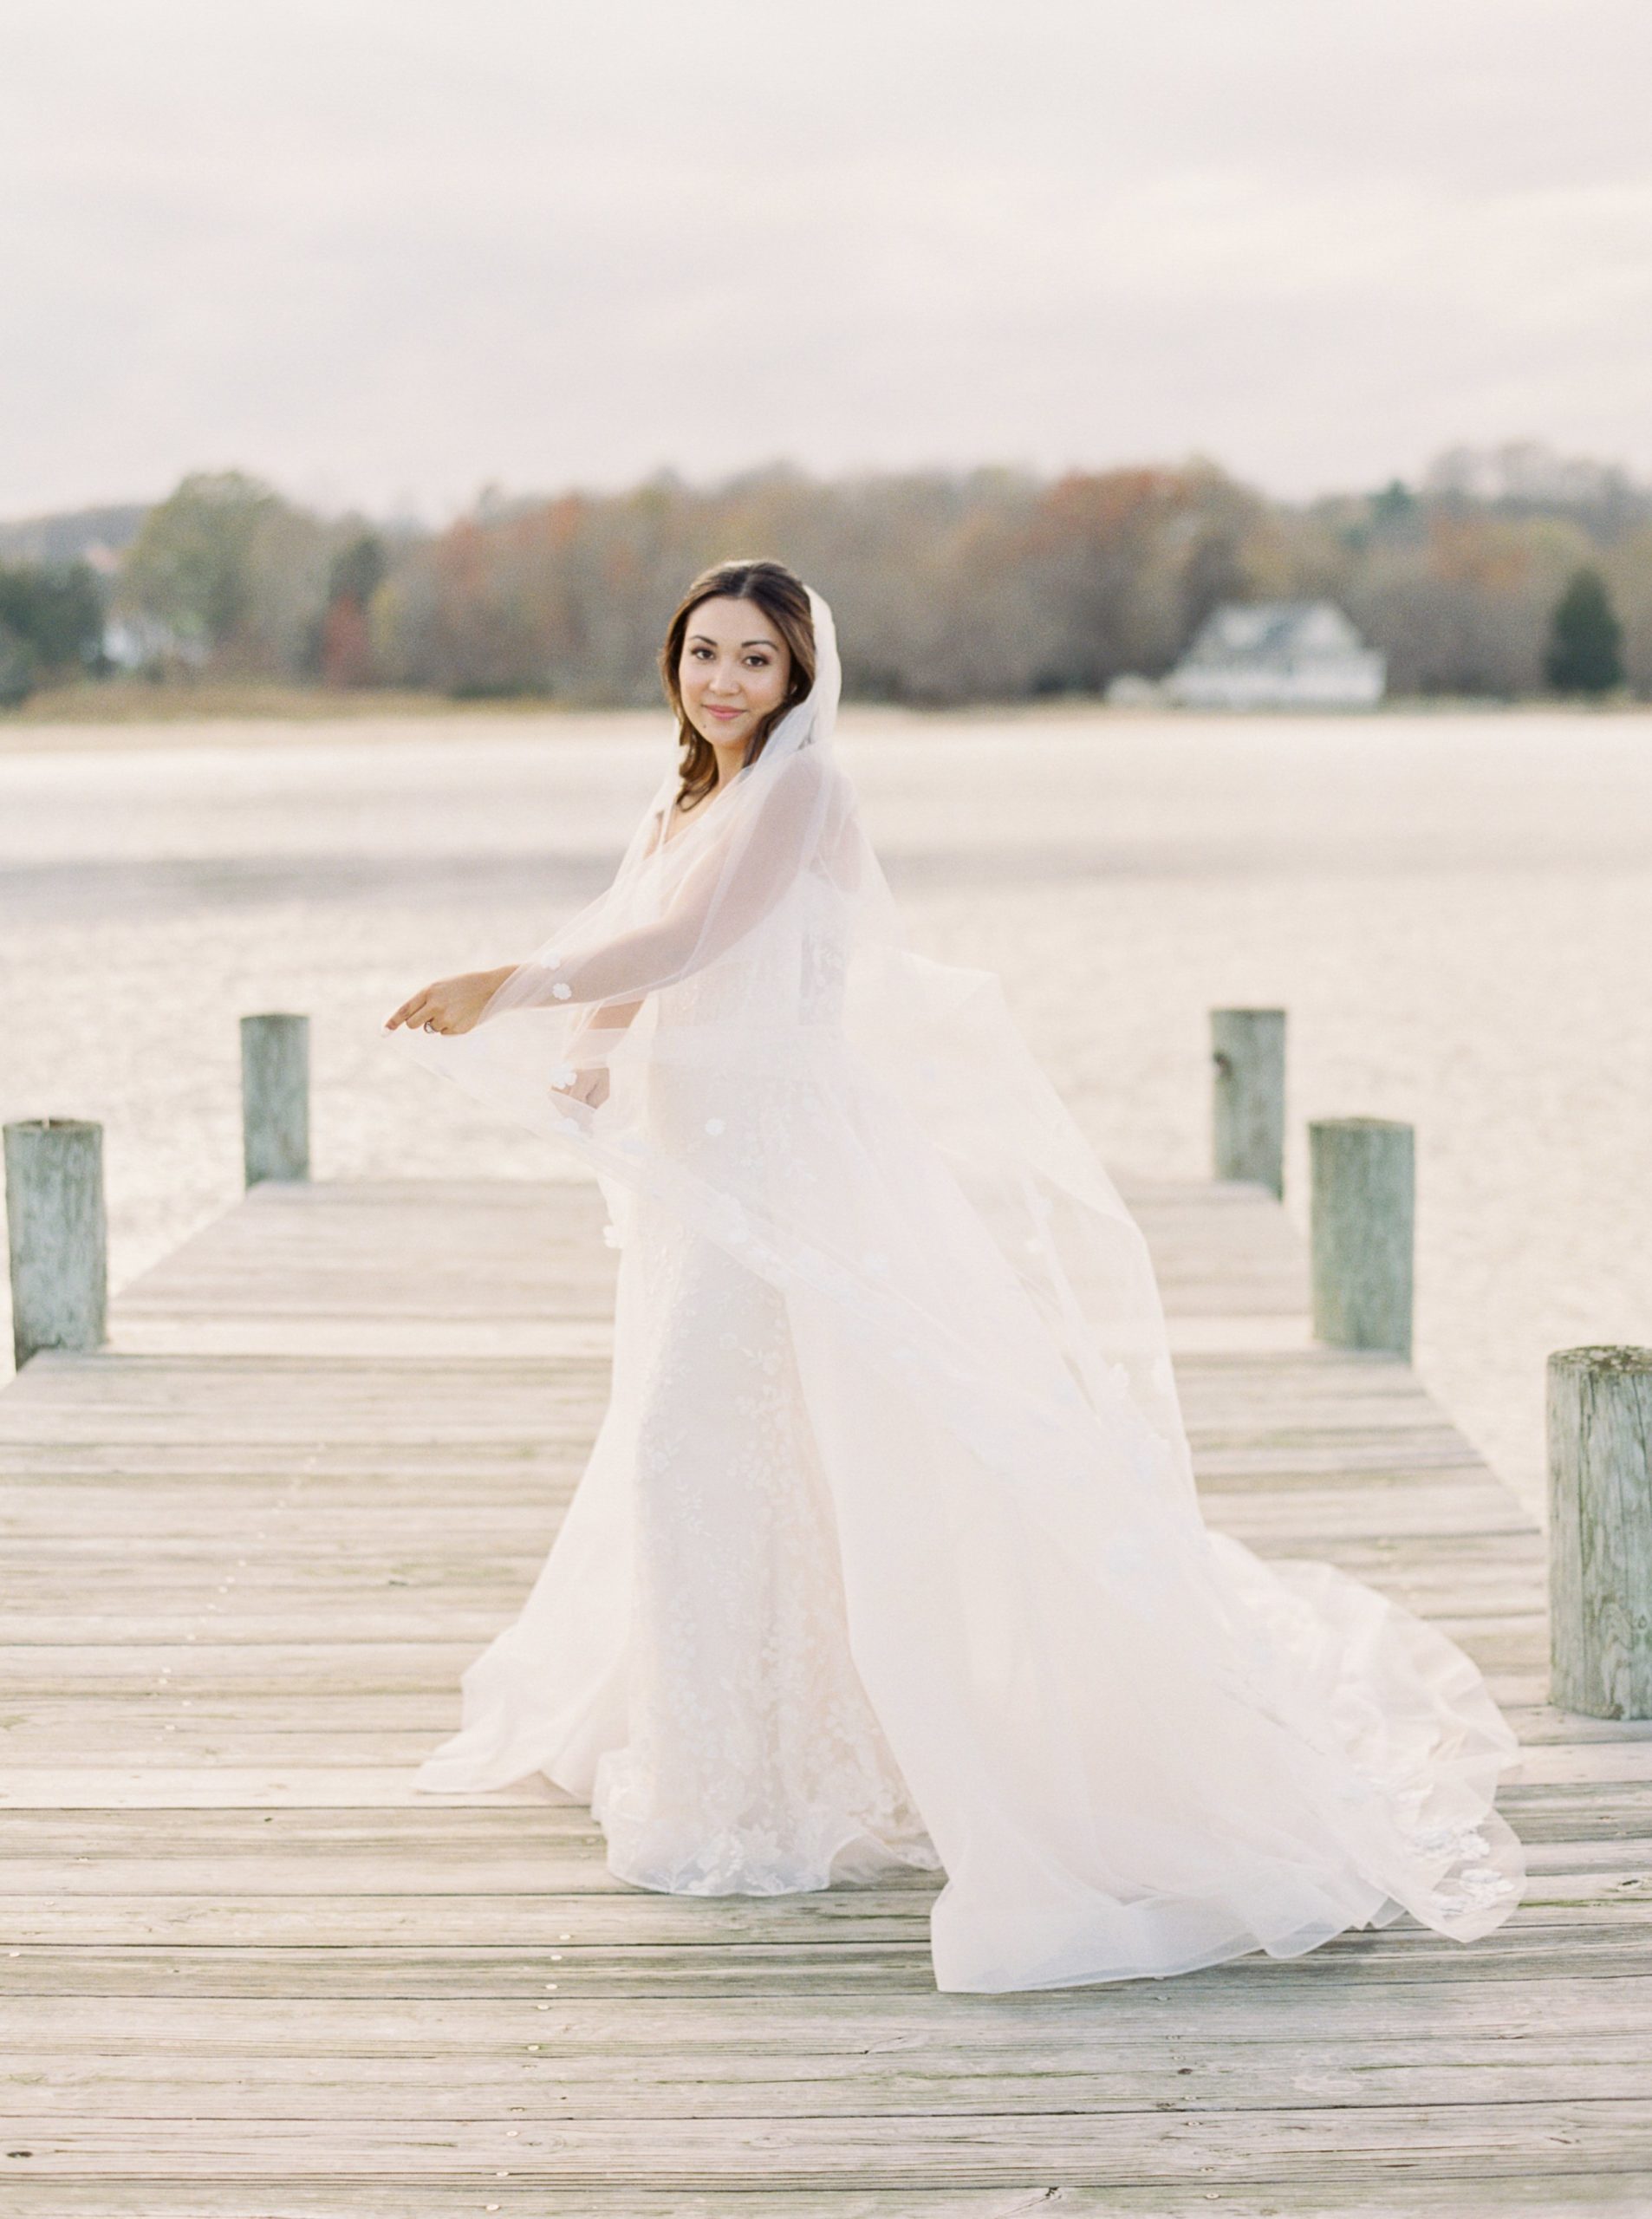 How To Get Stunning Veil Photos- Two Things to Remember - Showit Blog